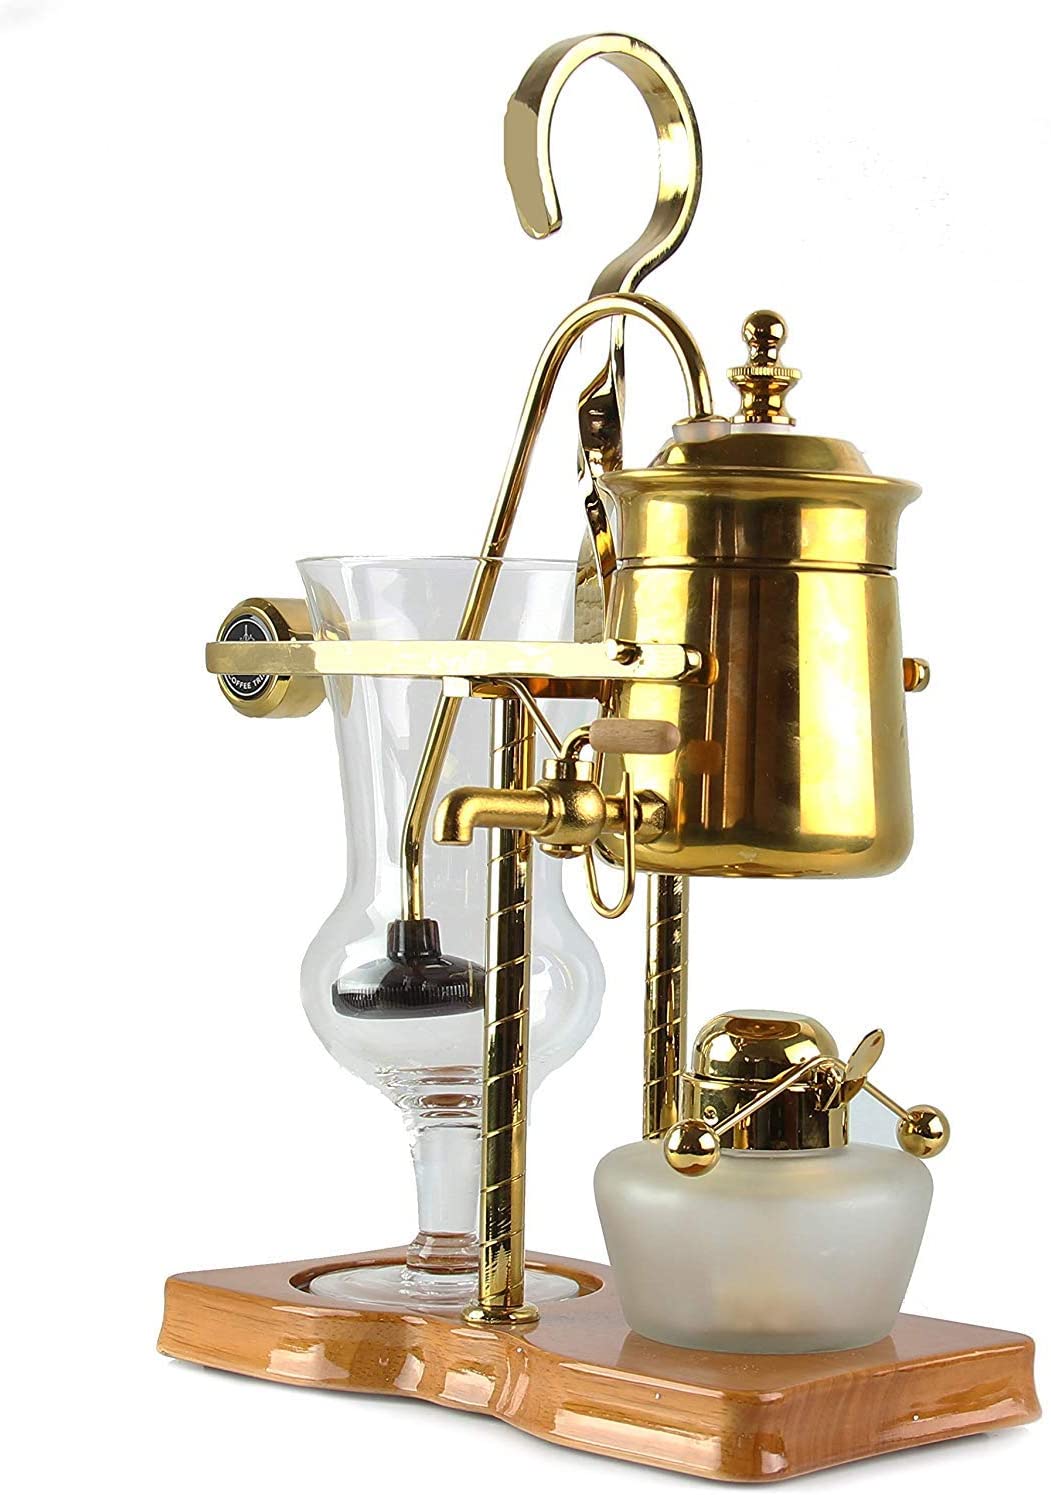 Siphon Coffee Machine Set - Belgian Siphon Coffee Machines with Family Balance, Classic and Elegant Retro Design, Vacuum Coffee Pot, Easy to Clean, Gold